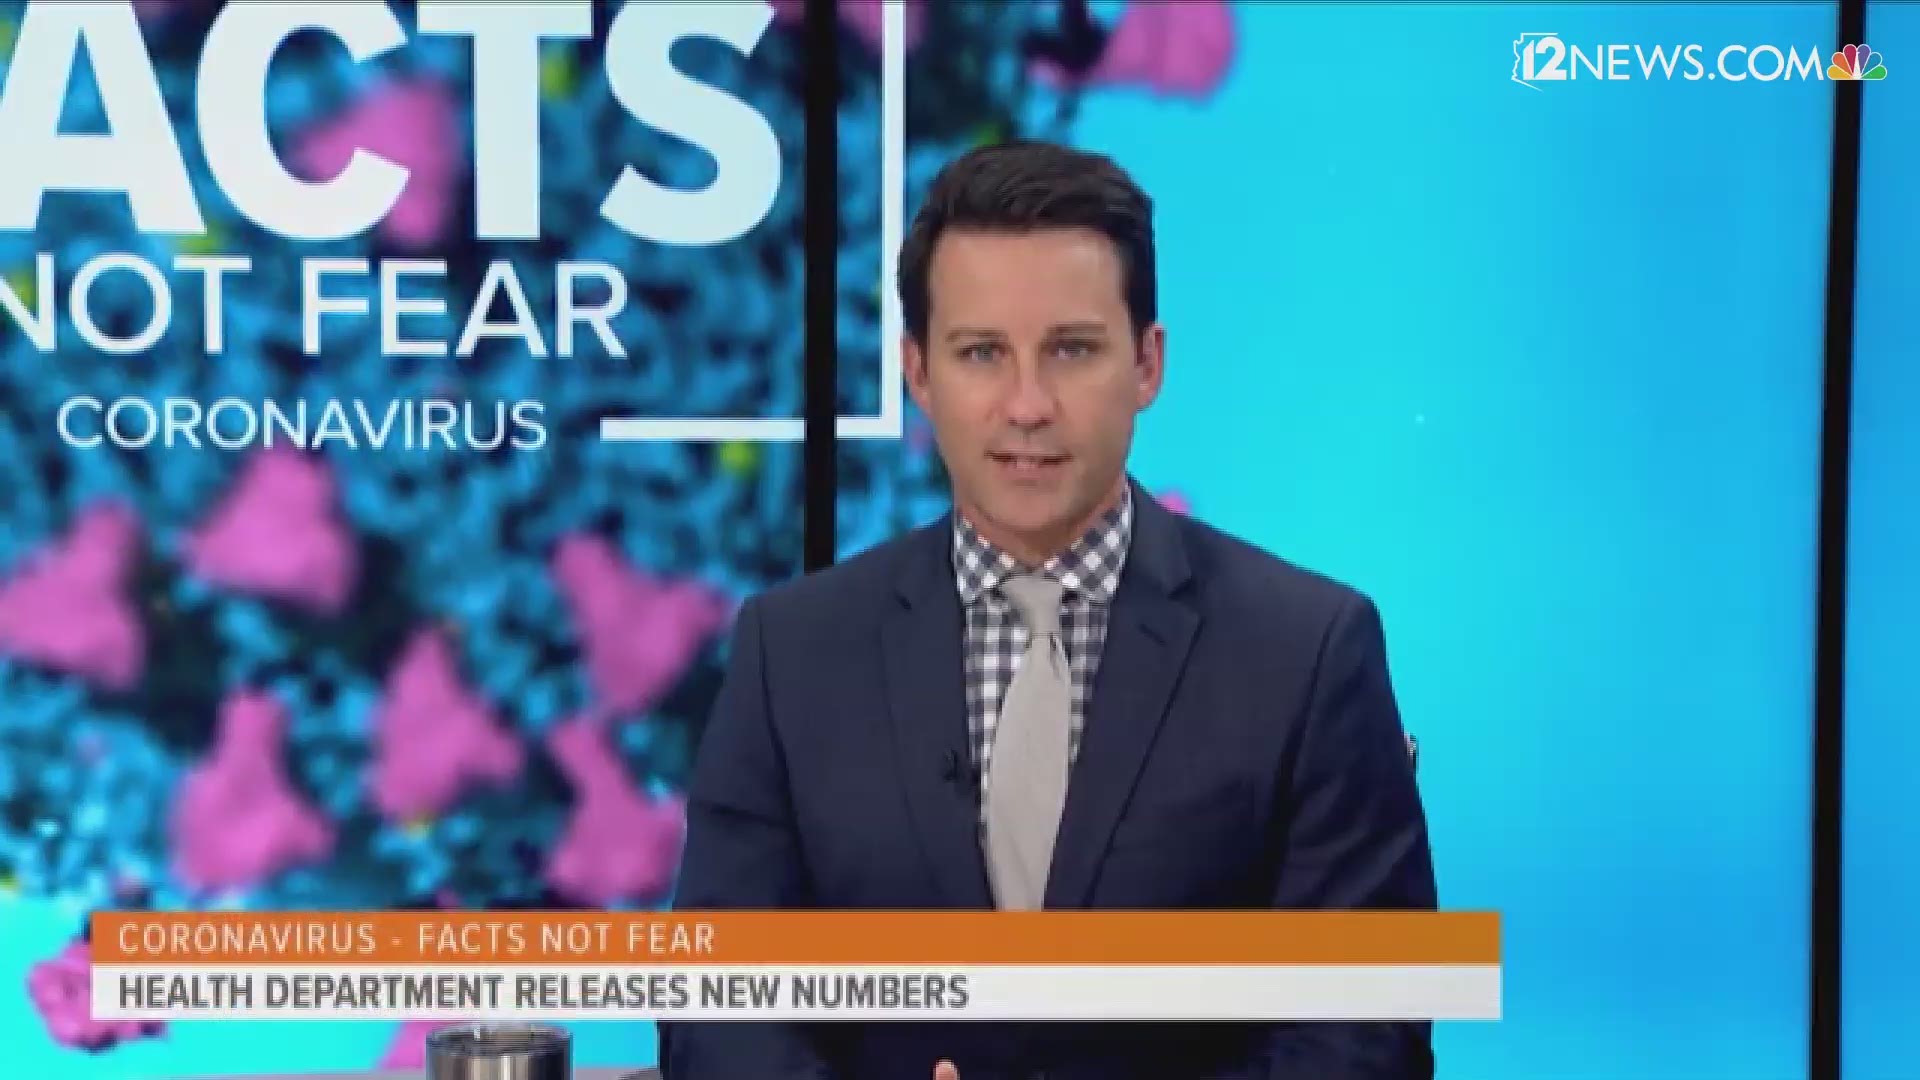 We have an update on the cases of coronavirus in Arizona. Ryan Cody has the latest numbers.